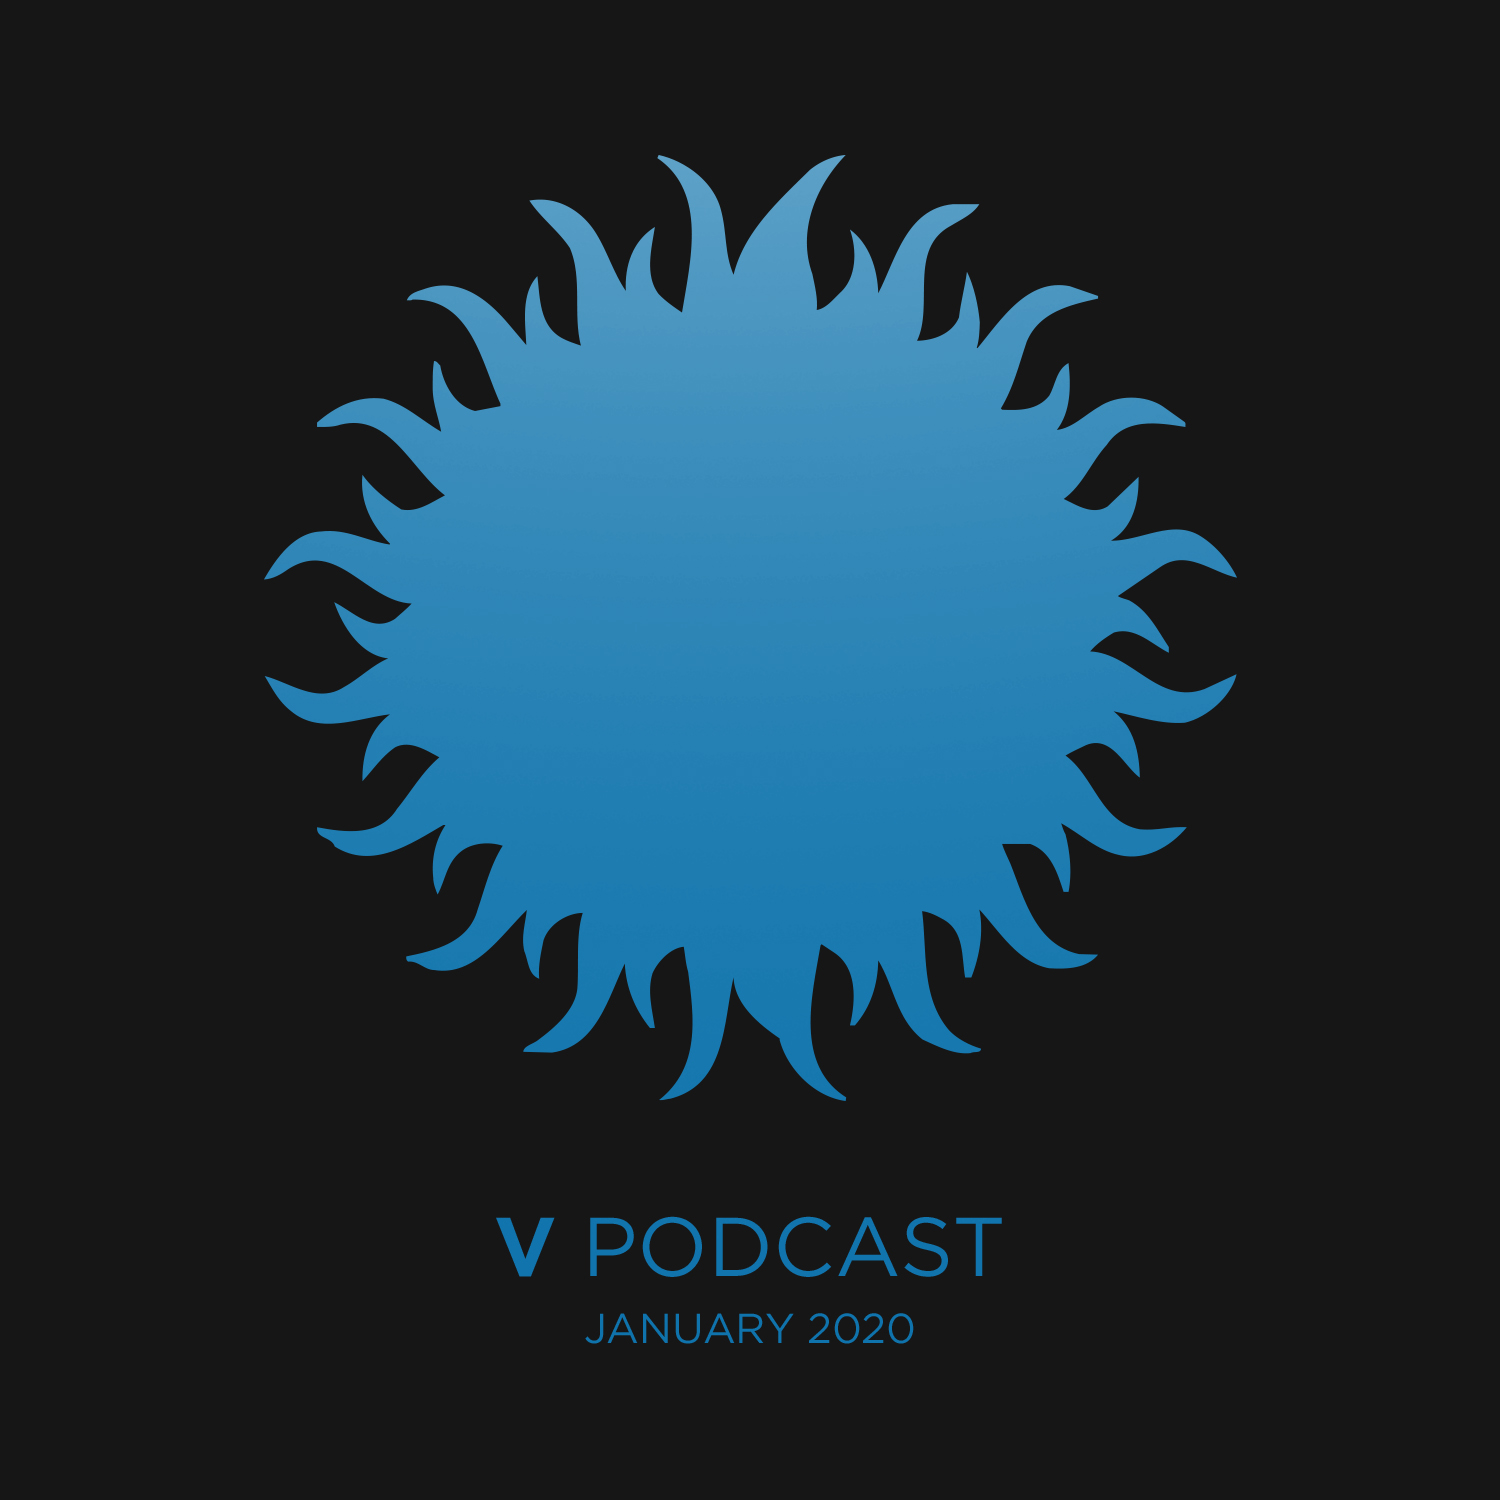 V Podcast 085 - Drum and Bass - hosted by Bryan Gee Artwork